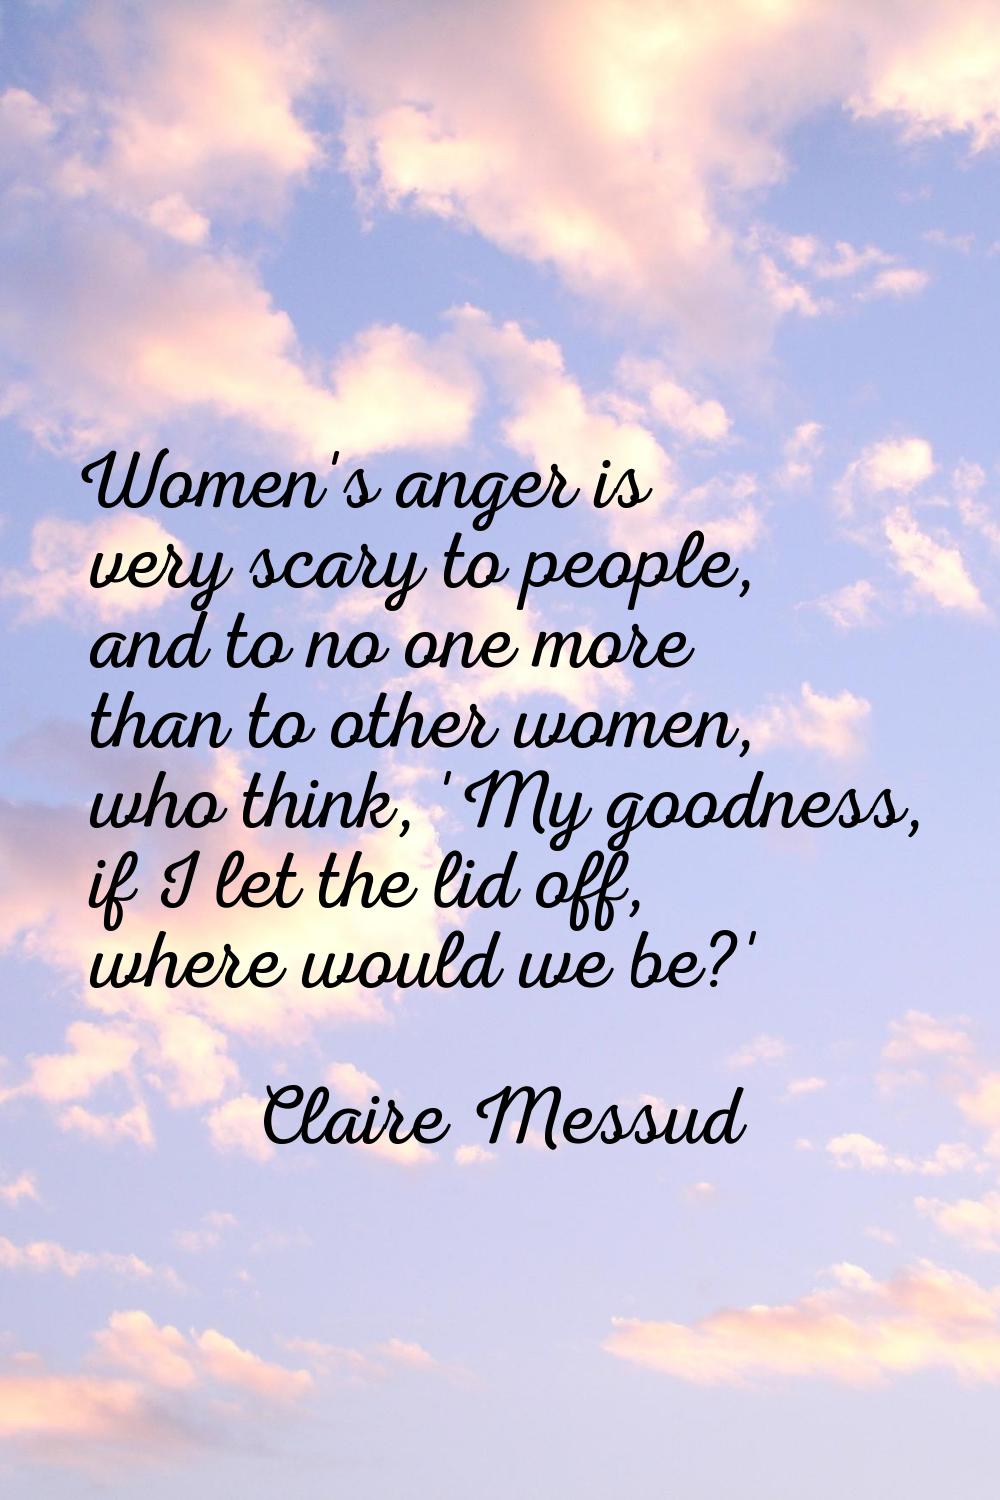 Women's anger is very scary to people, and to no one more than to other women, who think, 'My goodn